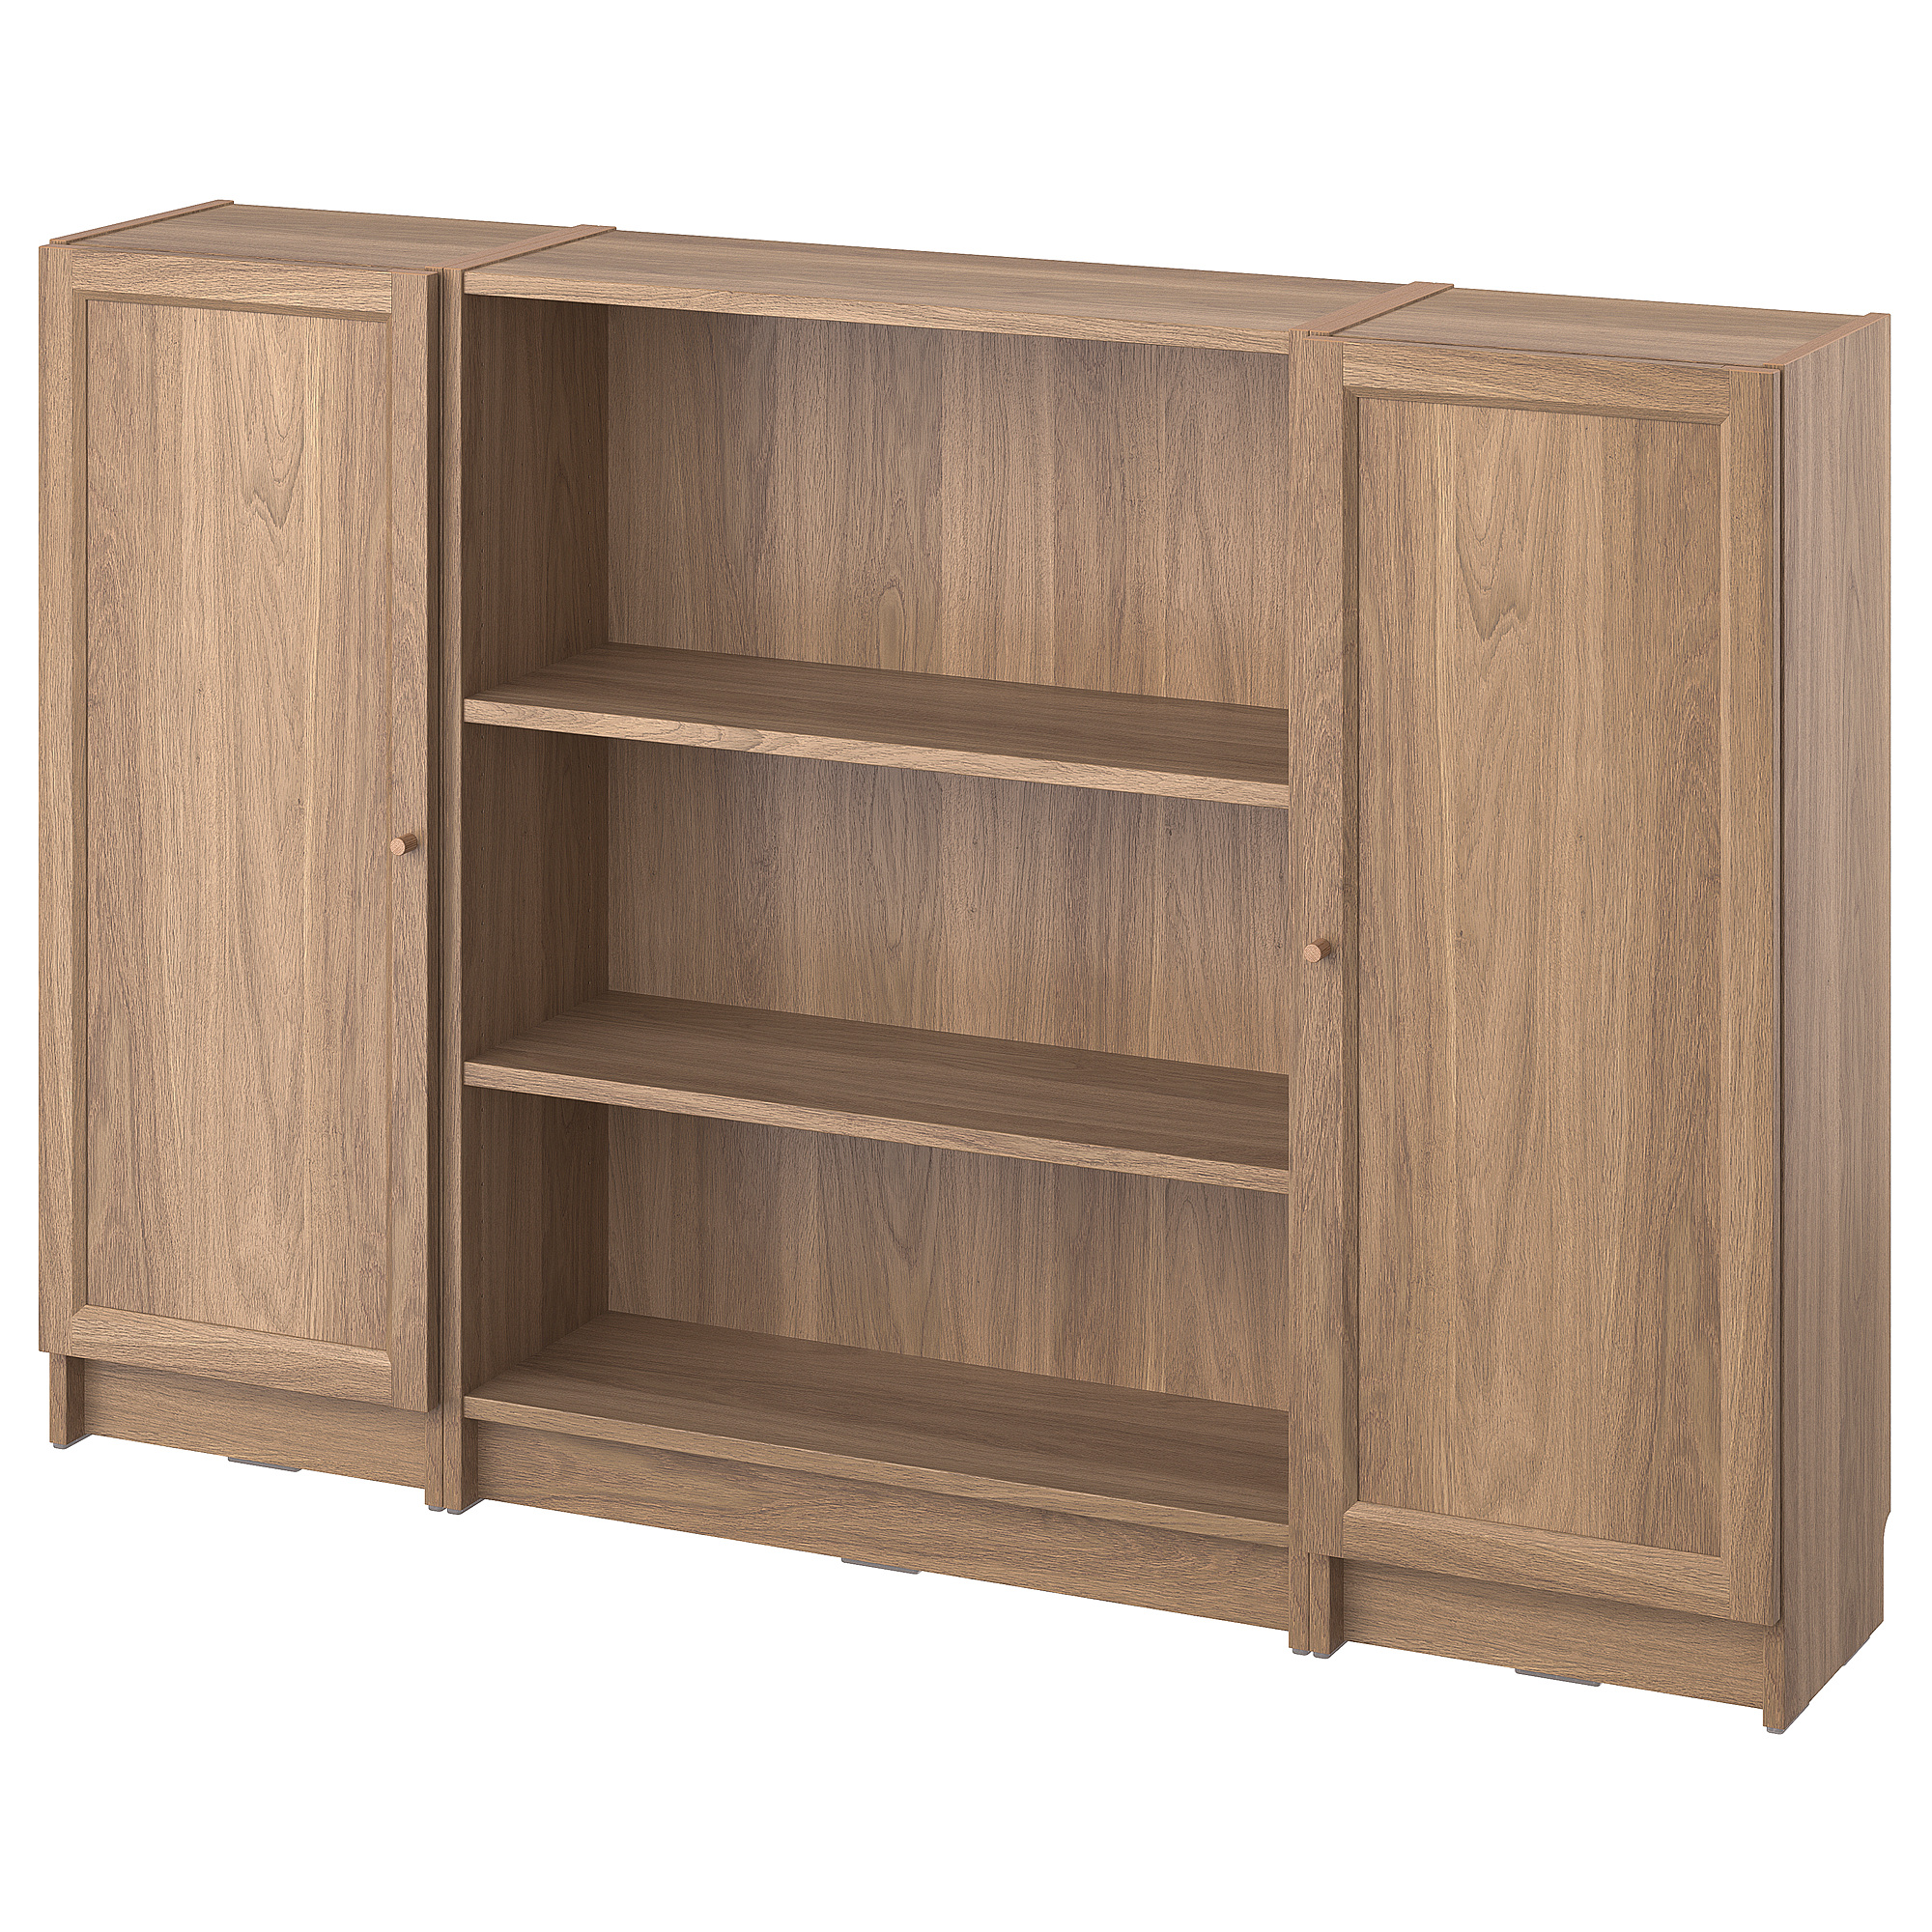 BILLY/OXBERG bookcase combination with doors